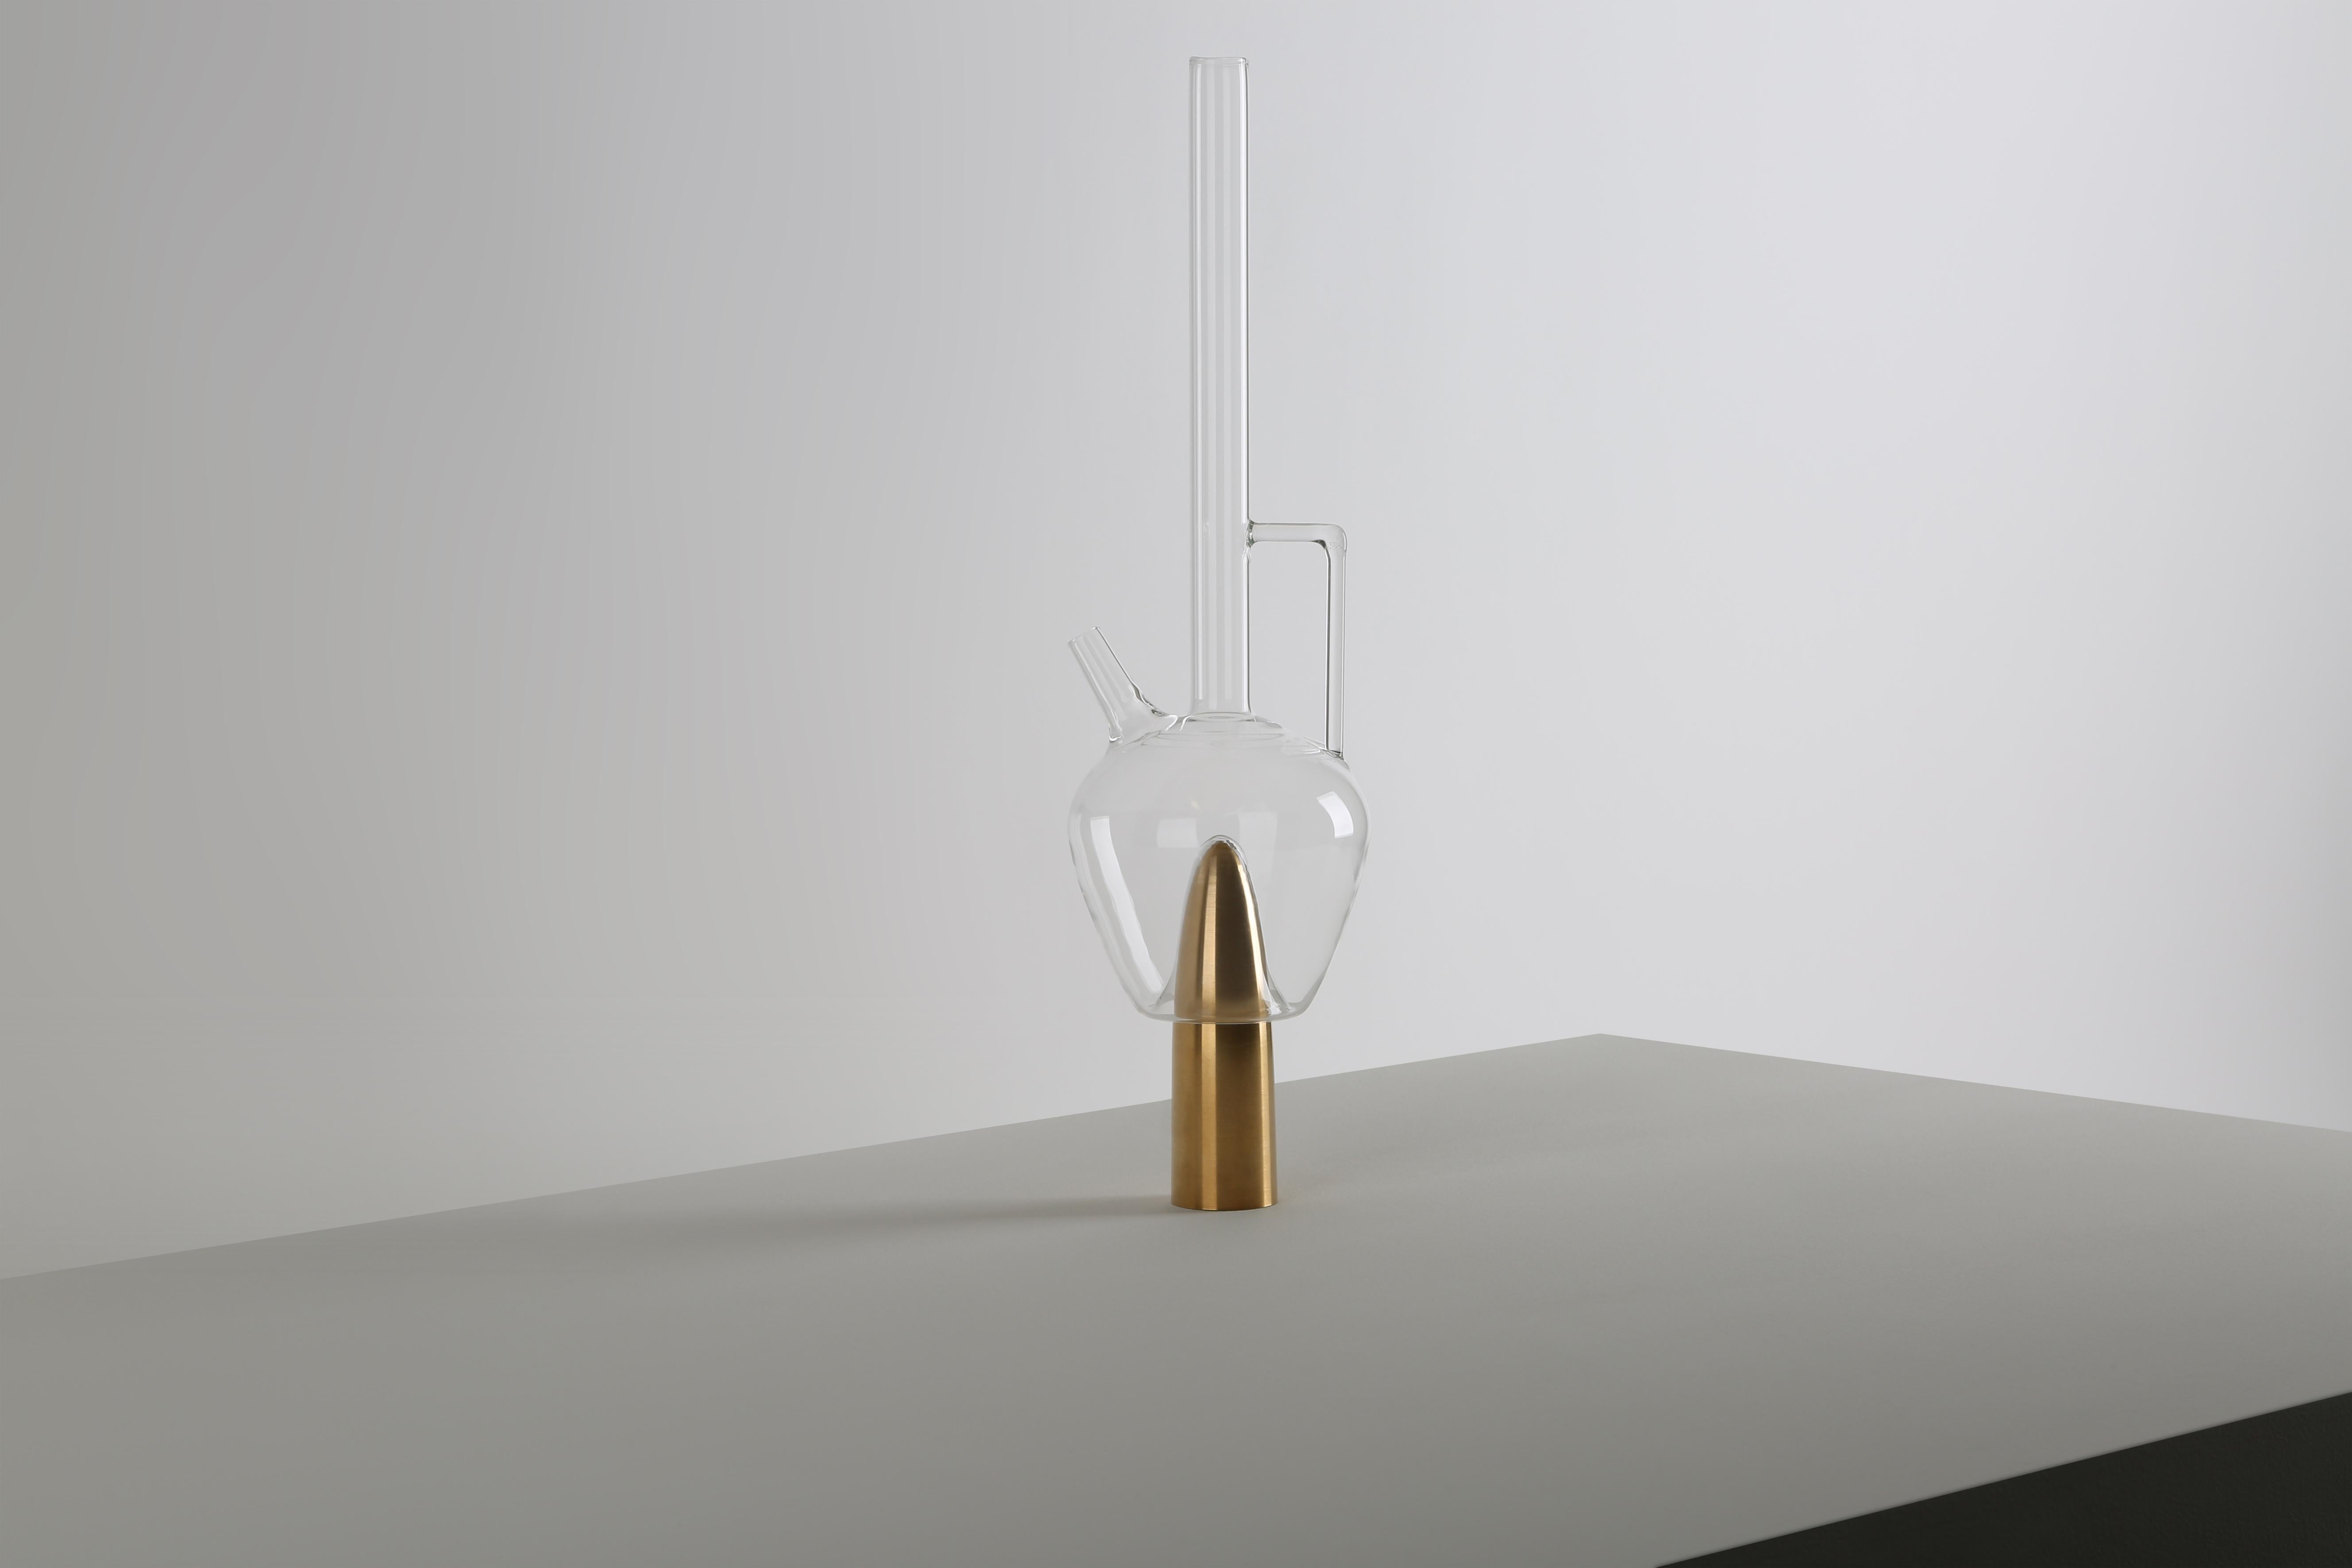 Plugged Carrafe by Richard Yasmine
Materials: hand-blown borosilicate glass with solid brushed brass base
Dimensions: 180cm x 48cm x 38cm

Made of solid brushed brass and a very thin hand-blown borosilicate glass mixed together to form one